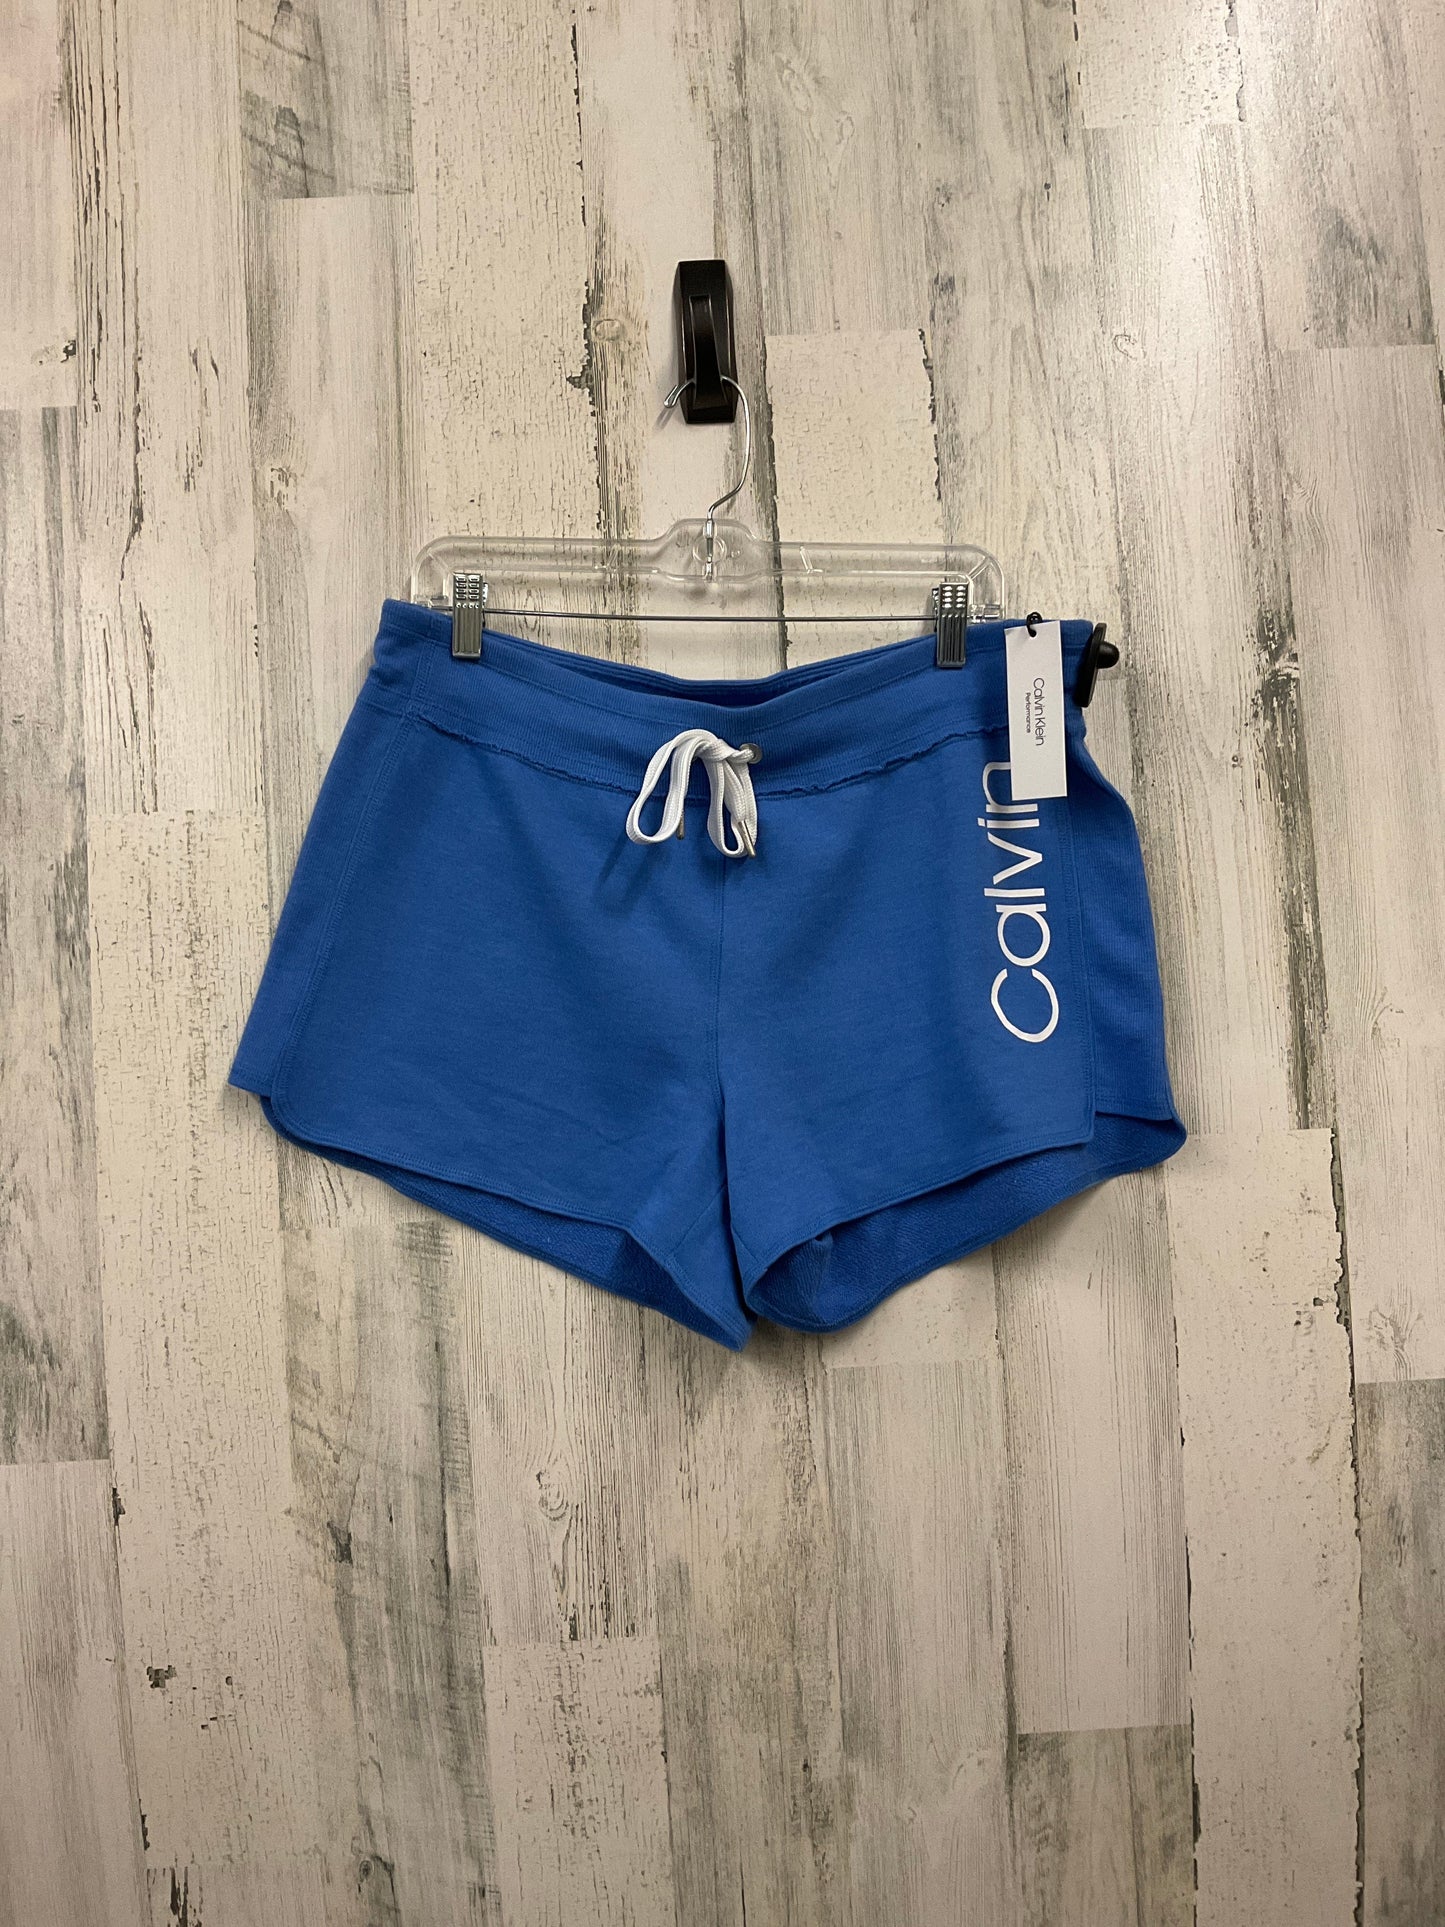 Athletic Shorts By Calvin Klein  Size: Xl